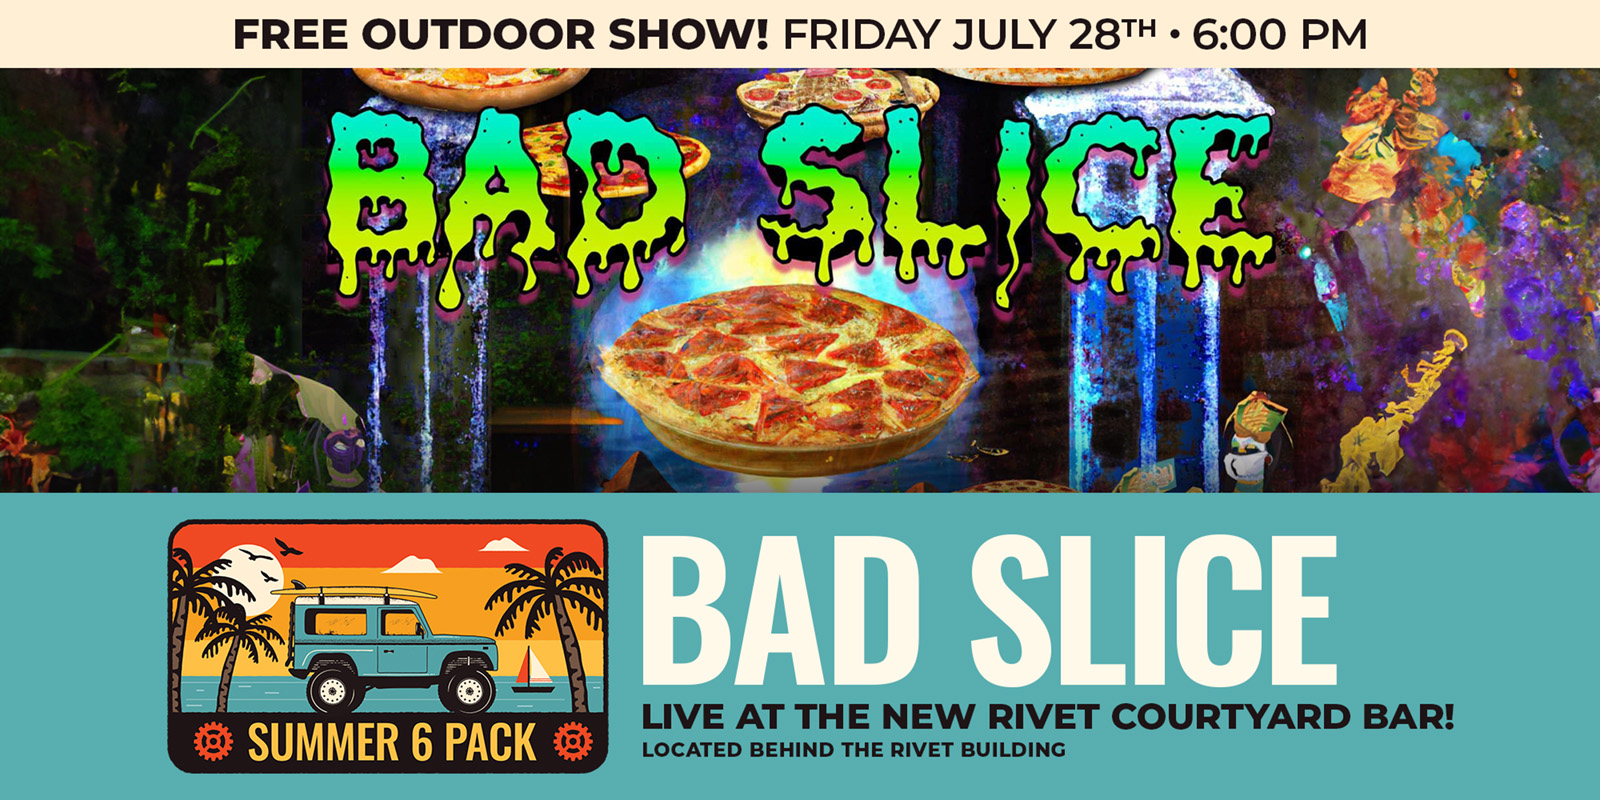 The Summer 6 Pack Free Outdoor Series continues at Rivet: Canteen & Assembly with Bad Slice on Friday, July 28th!